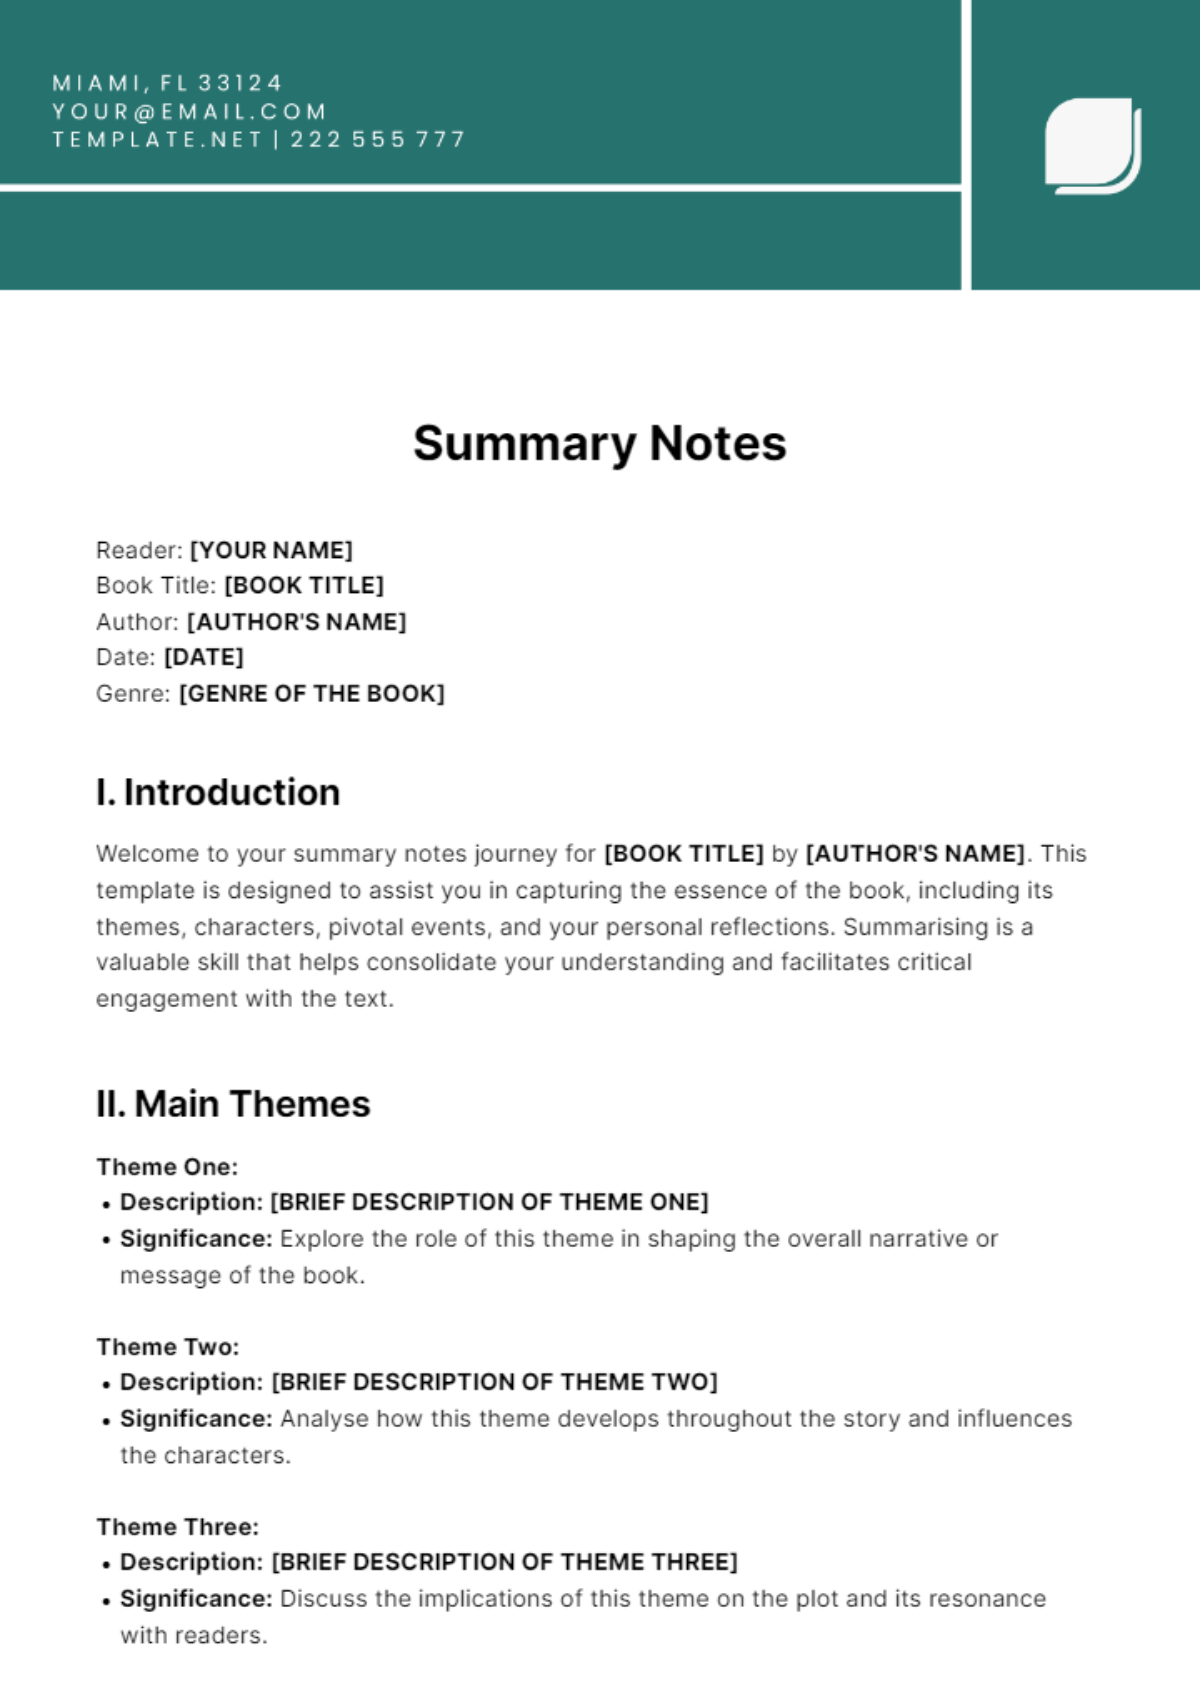 Summary Notes Template